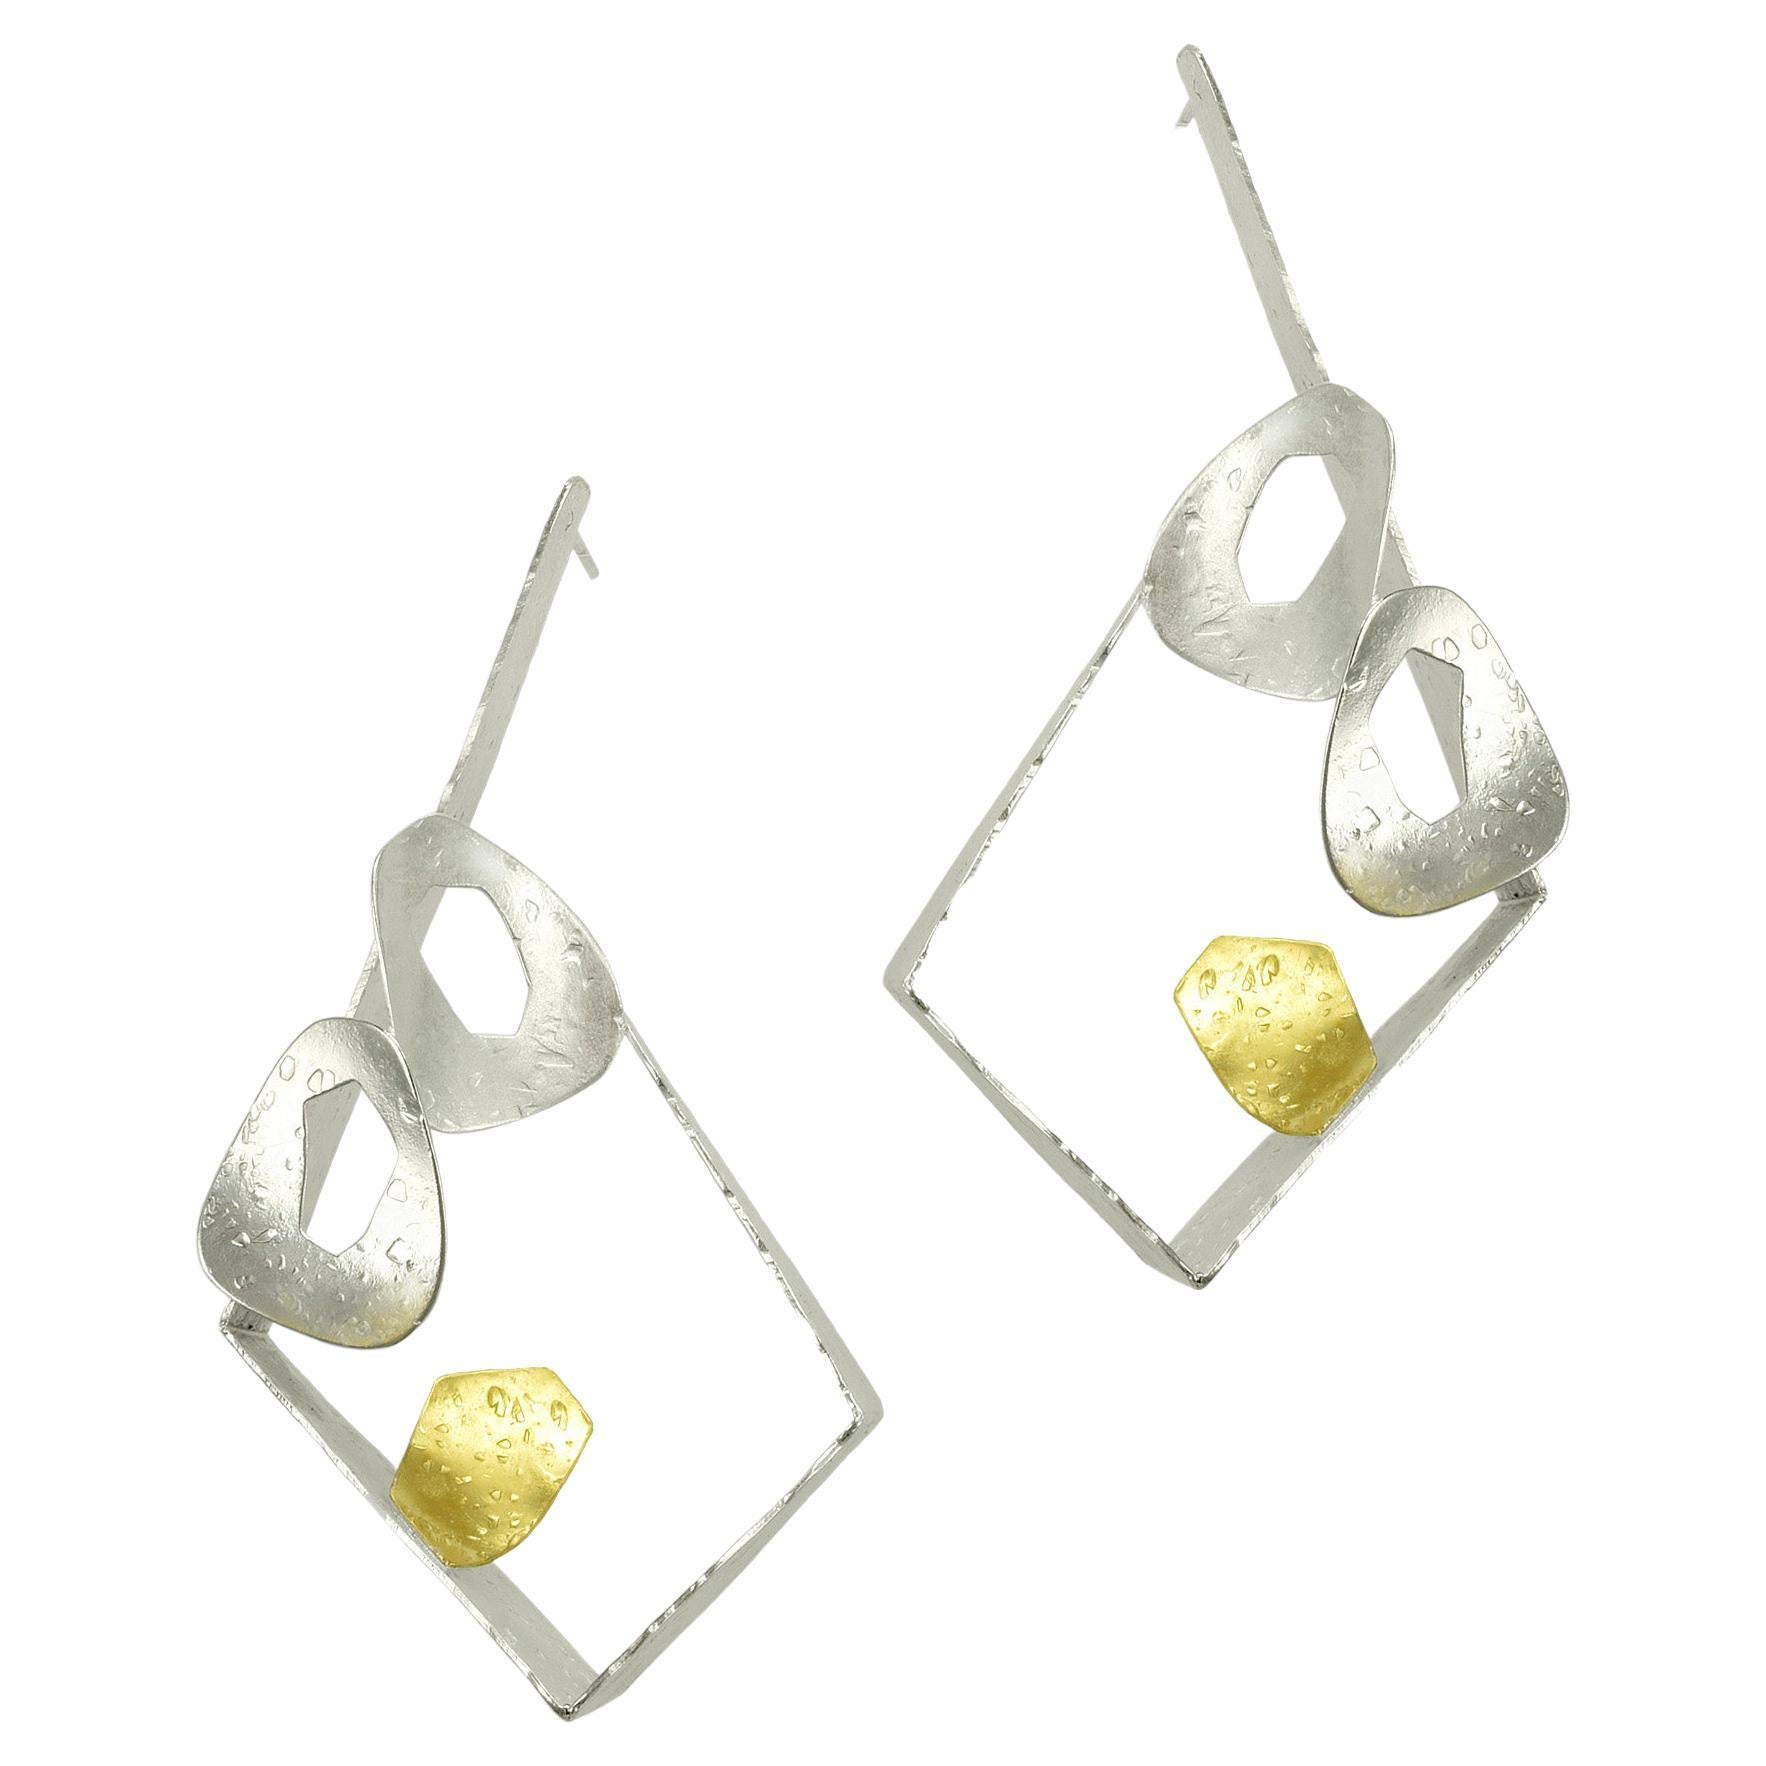 Surrealistic Effervescence Argentium Silver/22K Gold Earrings by Maria Blondet For Sale